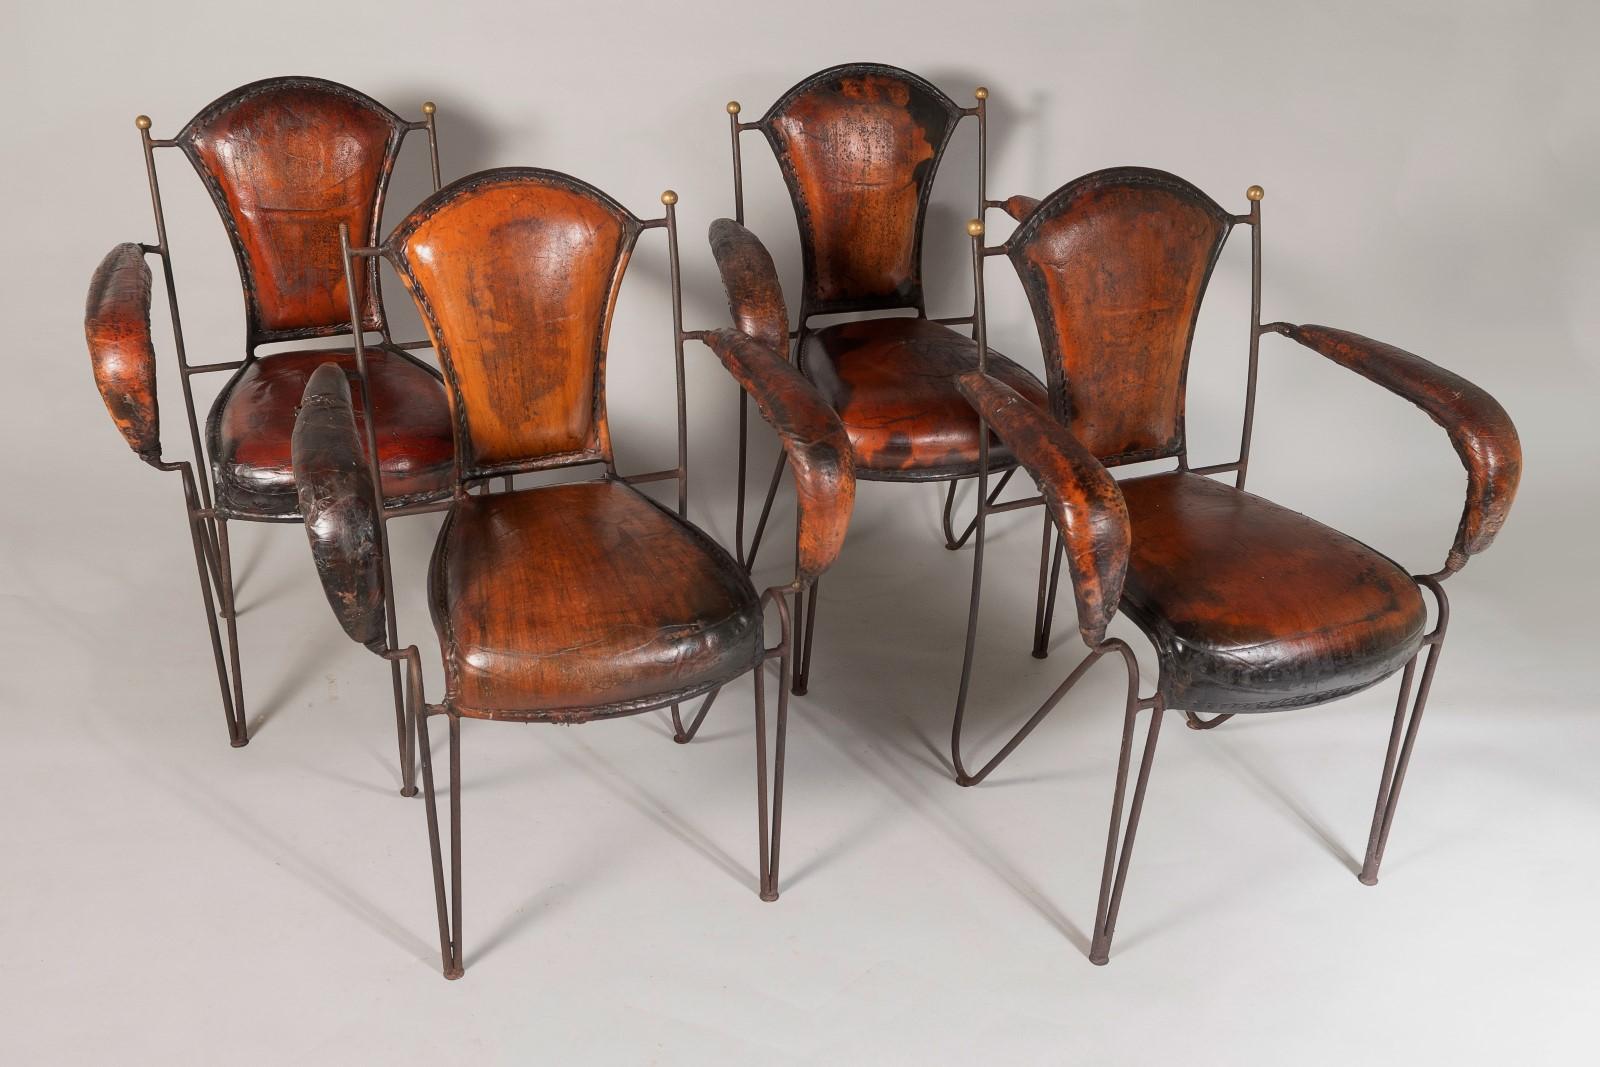 Art Deco French 1950s Jacques Adnet Hand Stitched Leather Iron Armchairs - Set of 4 For Sale